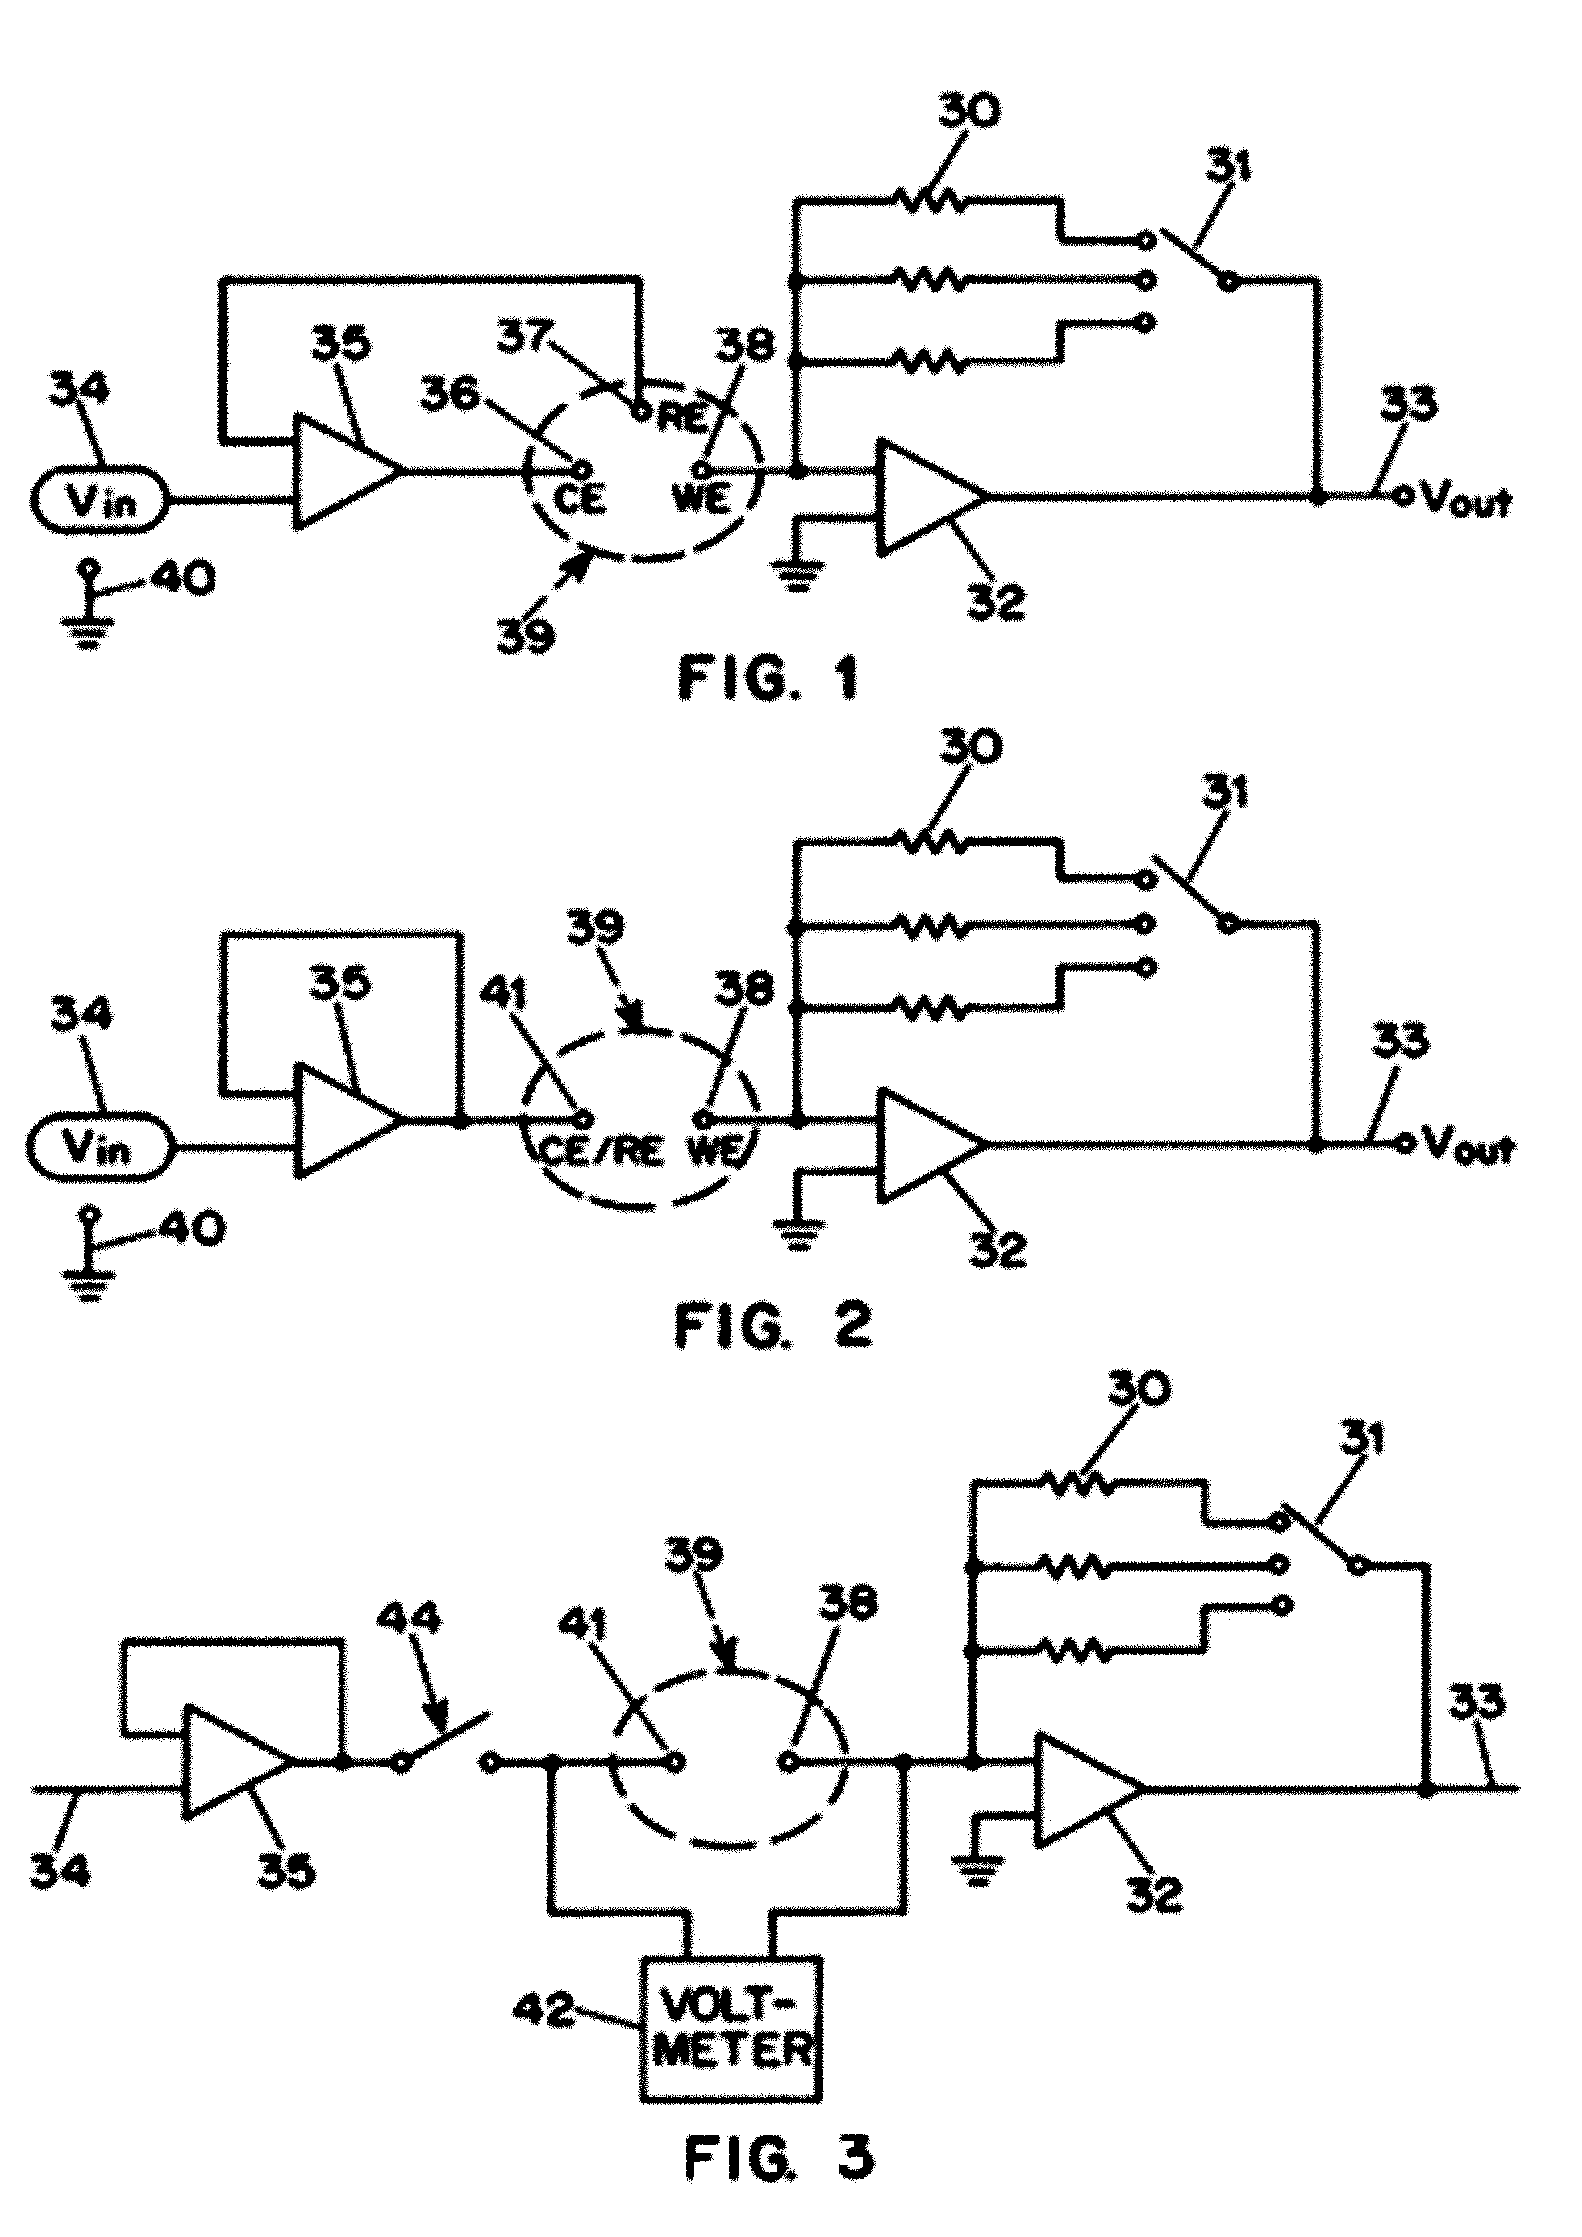 Measuring device and methods for use therewith